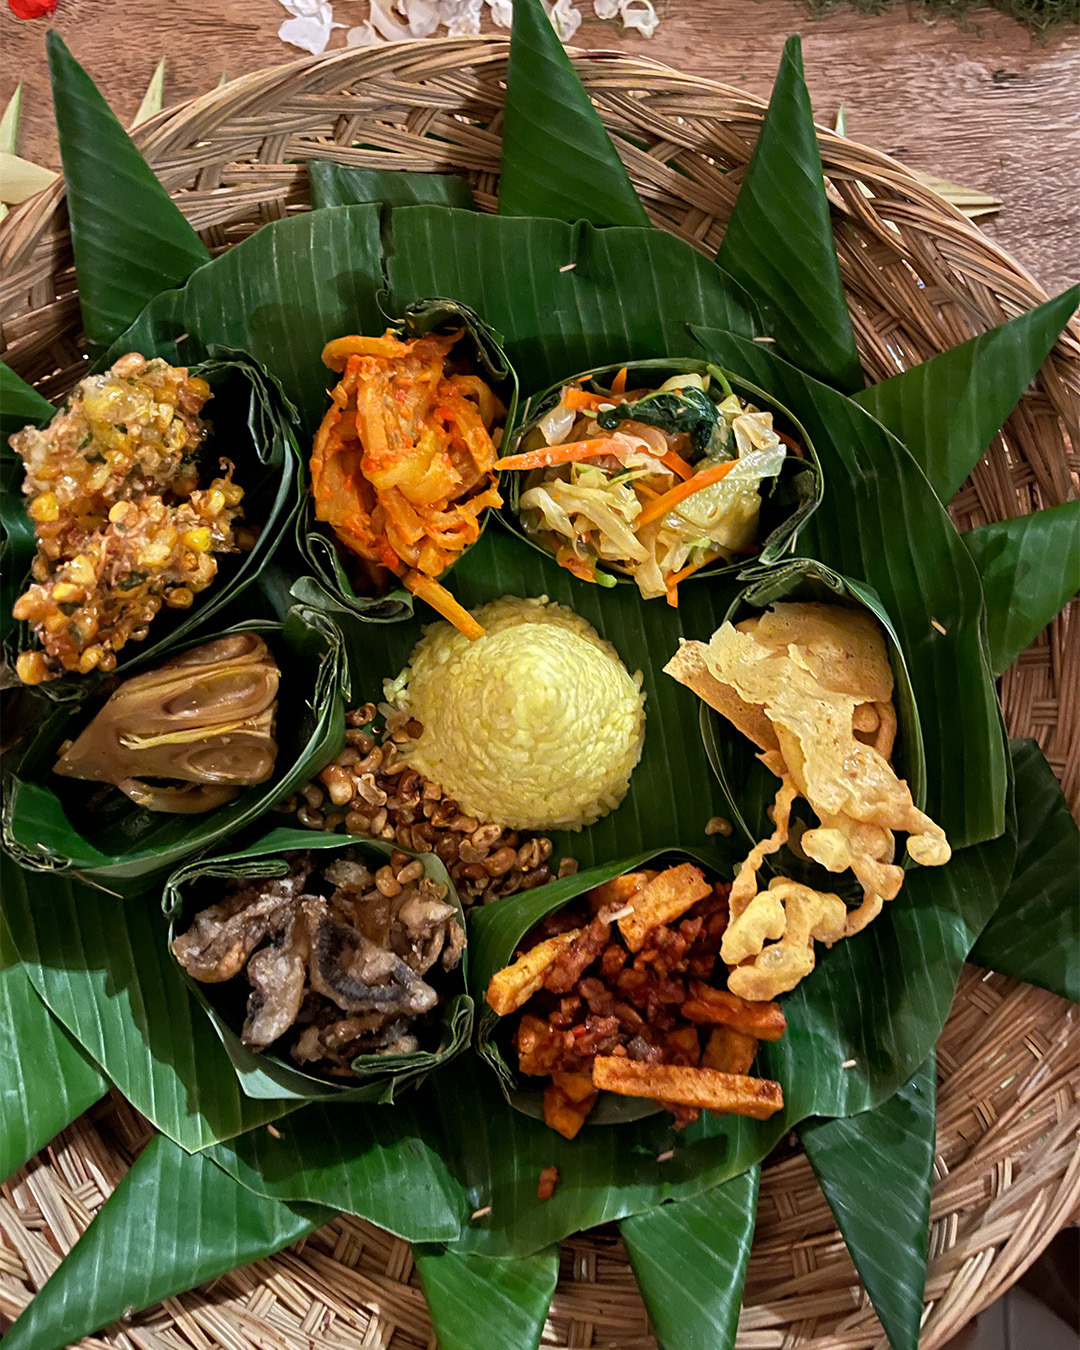 Small portion of Balinese dishes in brown woven basket